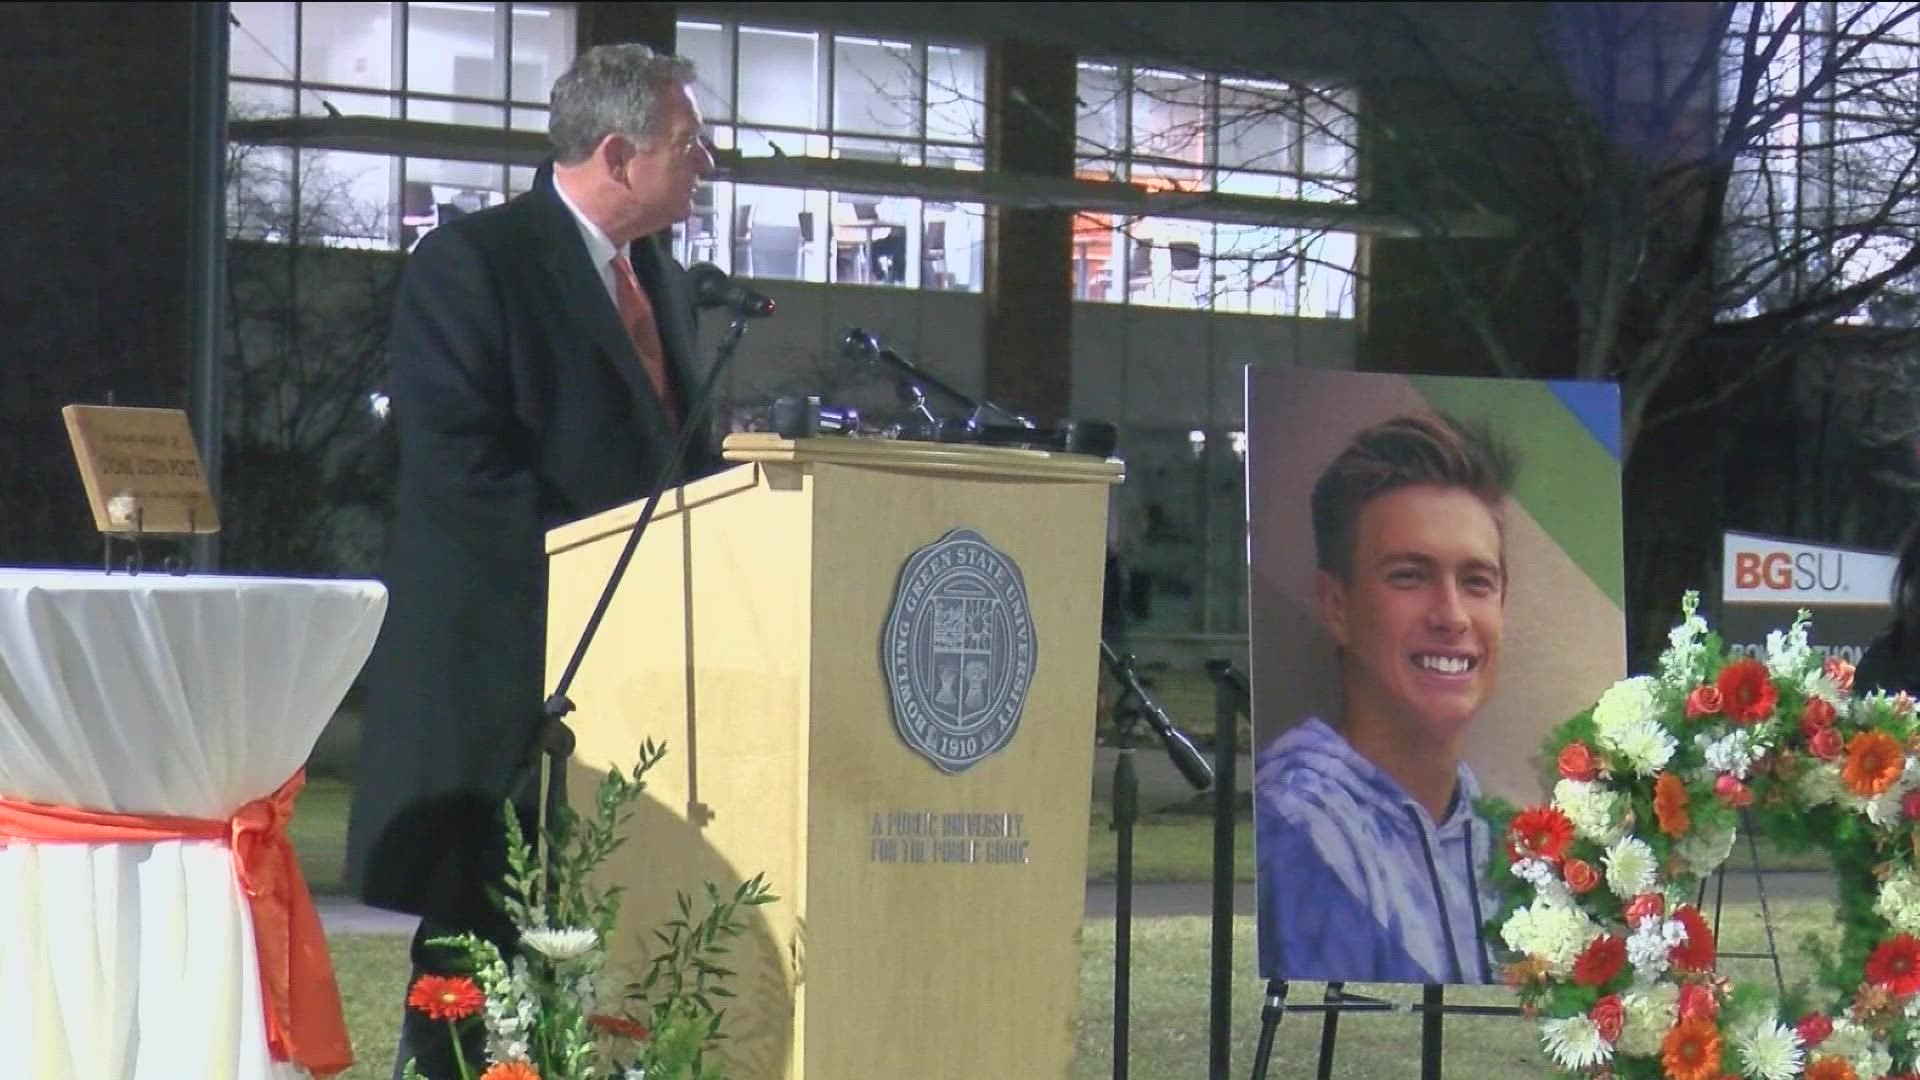 Family of Stone Foltz, who died due to hazing, says there's only one solution that will stop the problem at its source: eliminating the pledging process altogether.